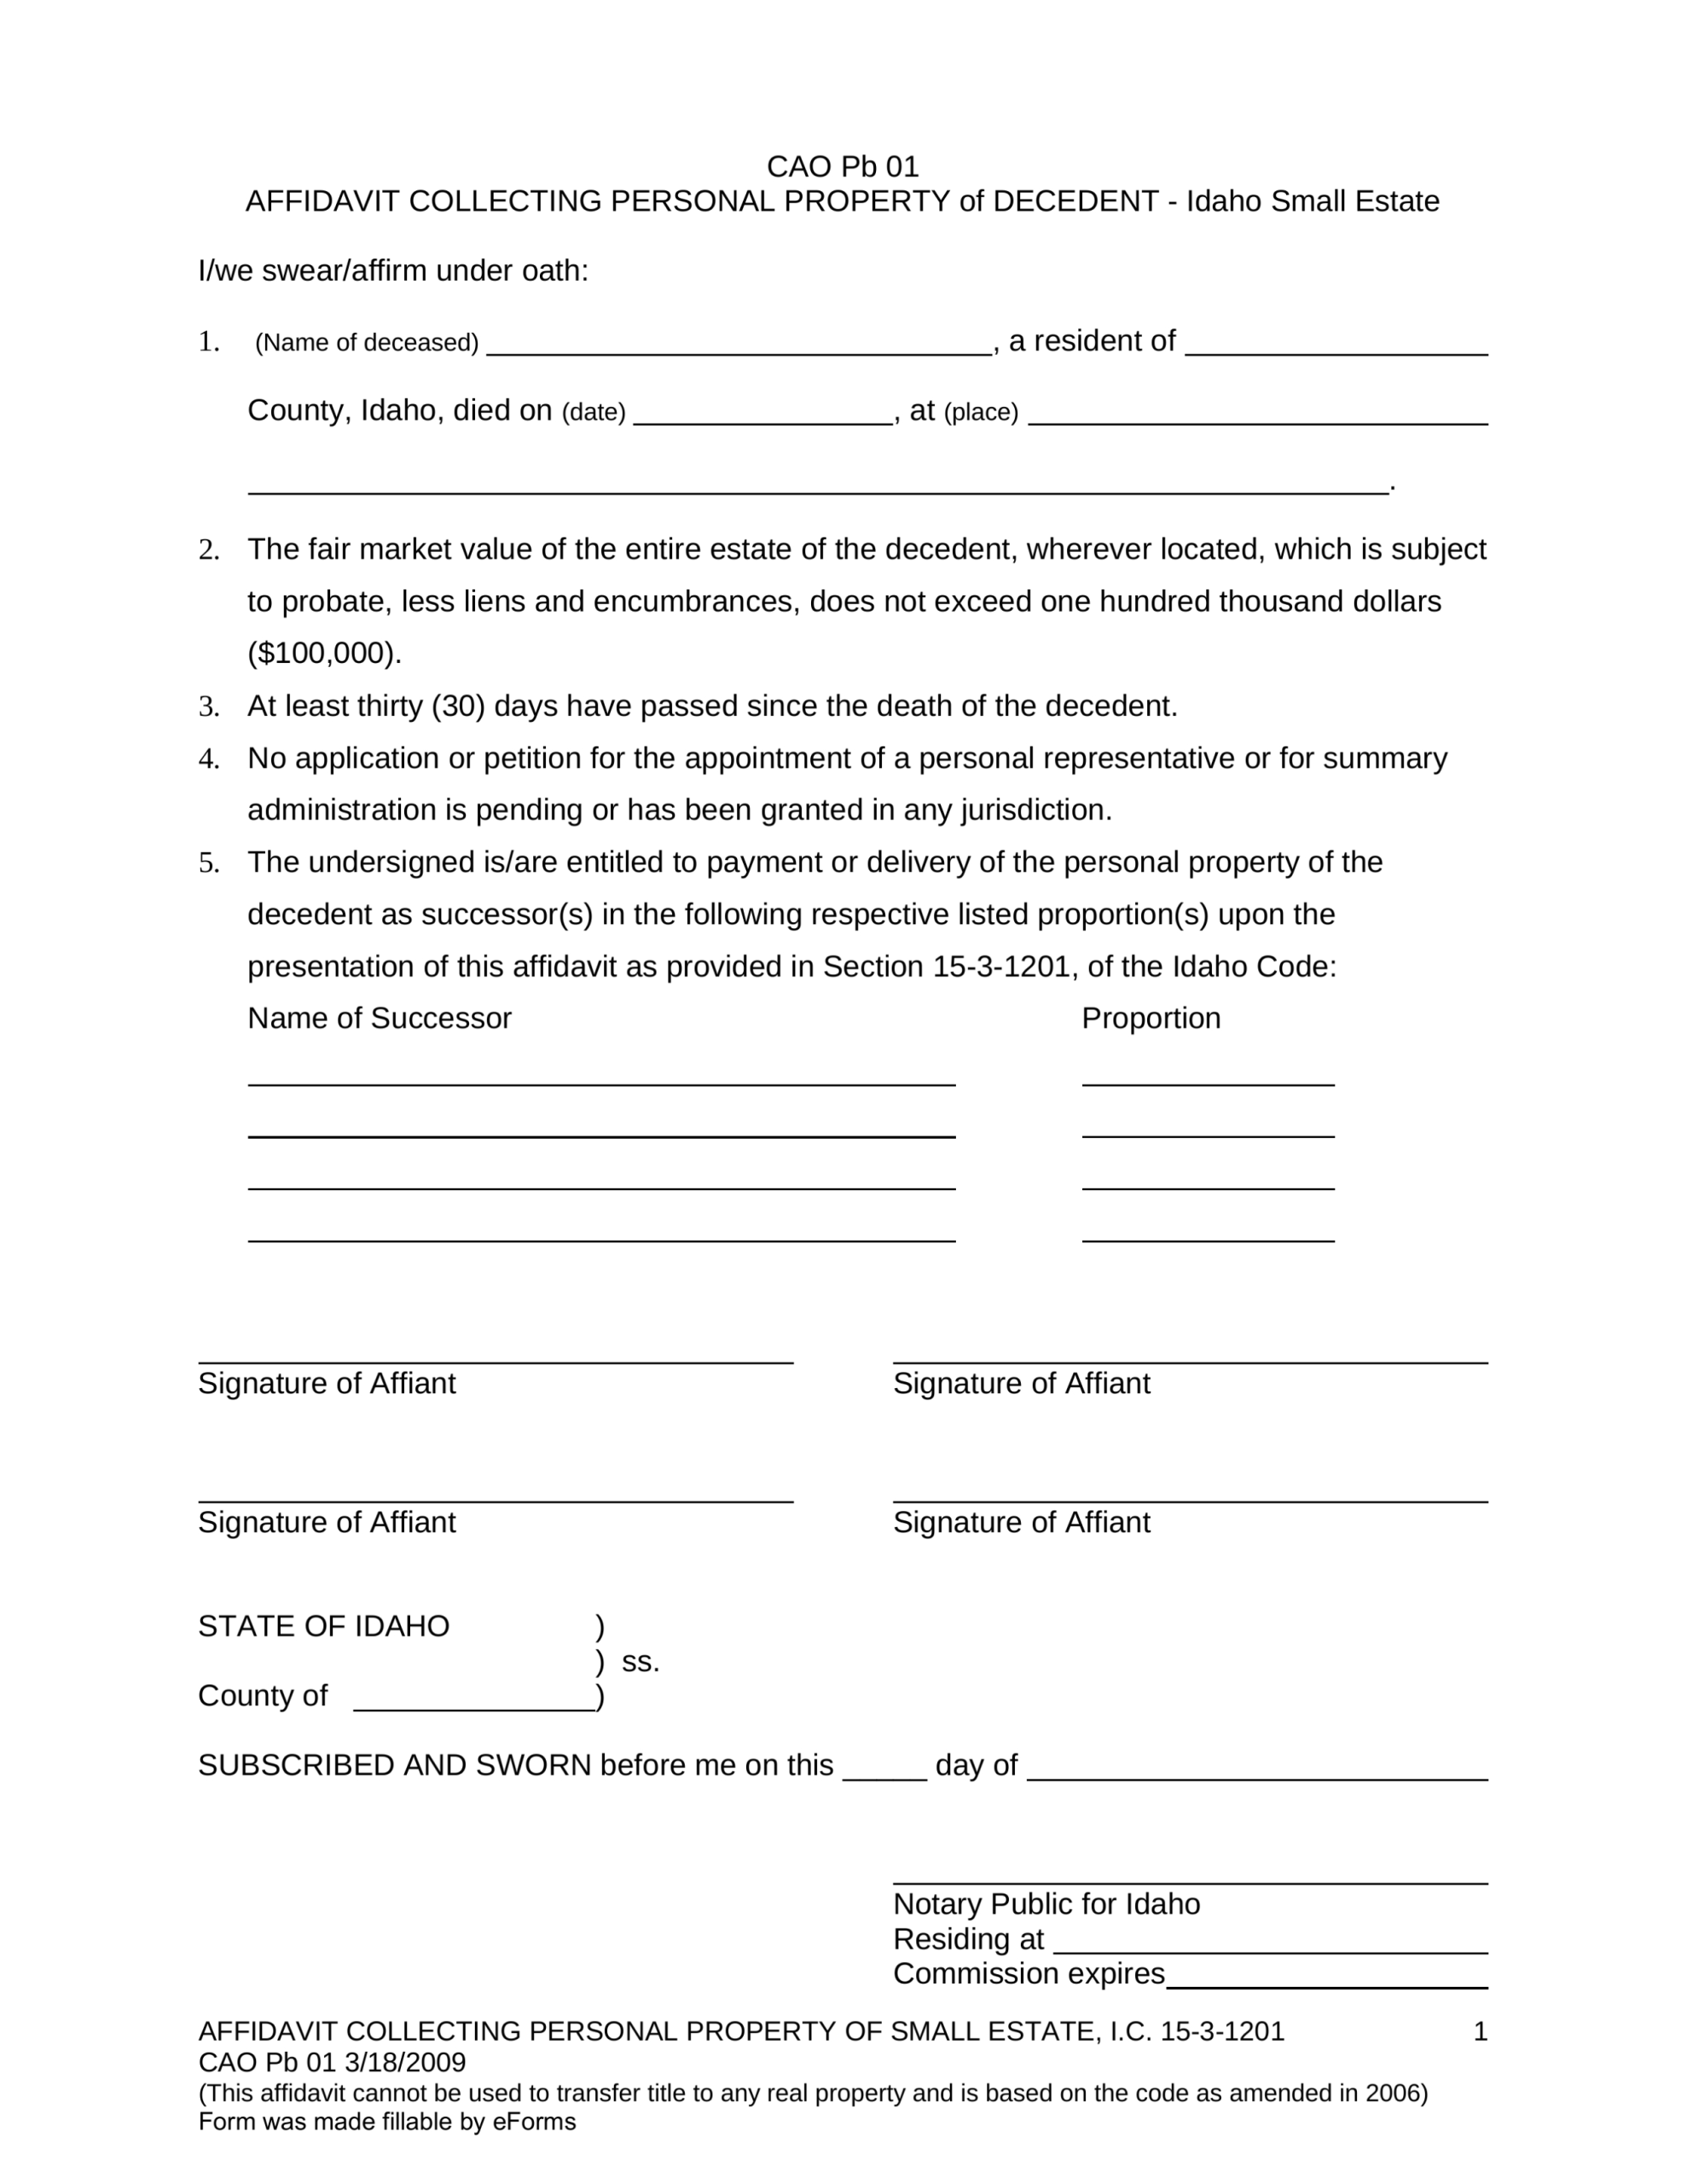 Free Idaho Small Estate Affidavit | Form Cao Pb 01 - Pdf - Eforms Throughout Probate Valuation Letter Template